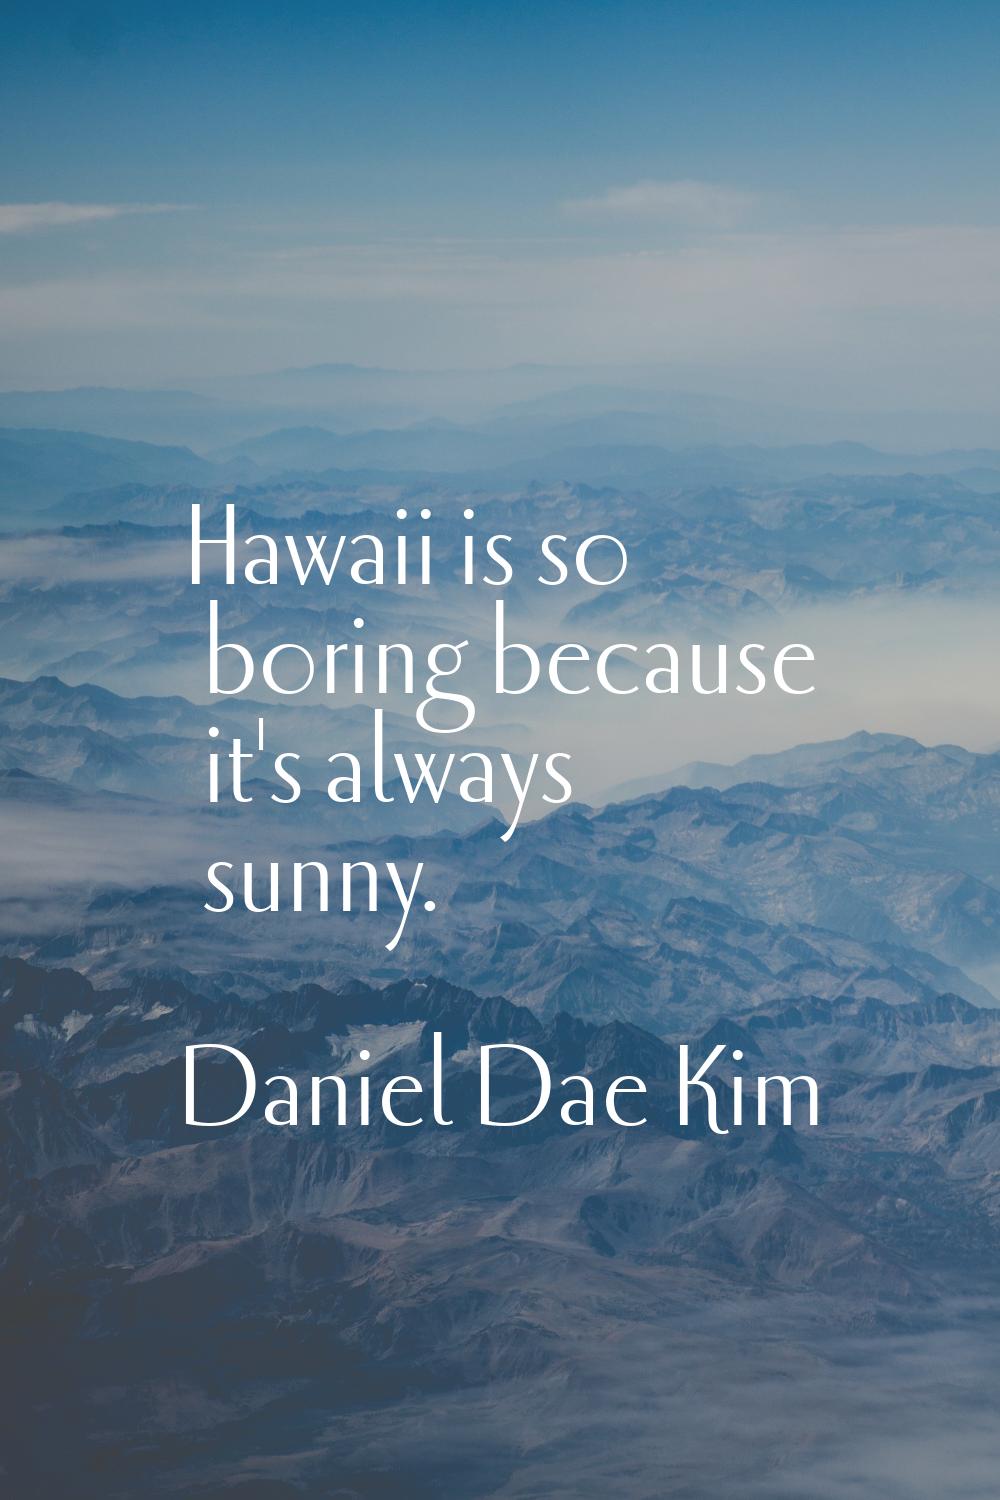 Hawaii is so boring because it's always sunny.